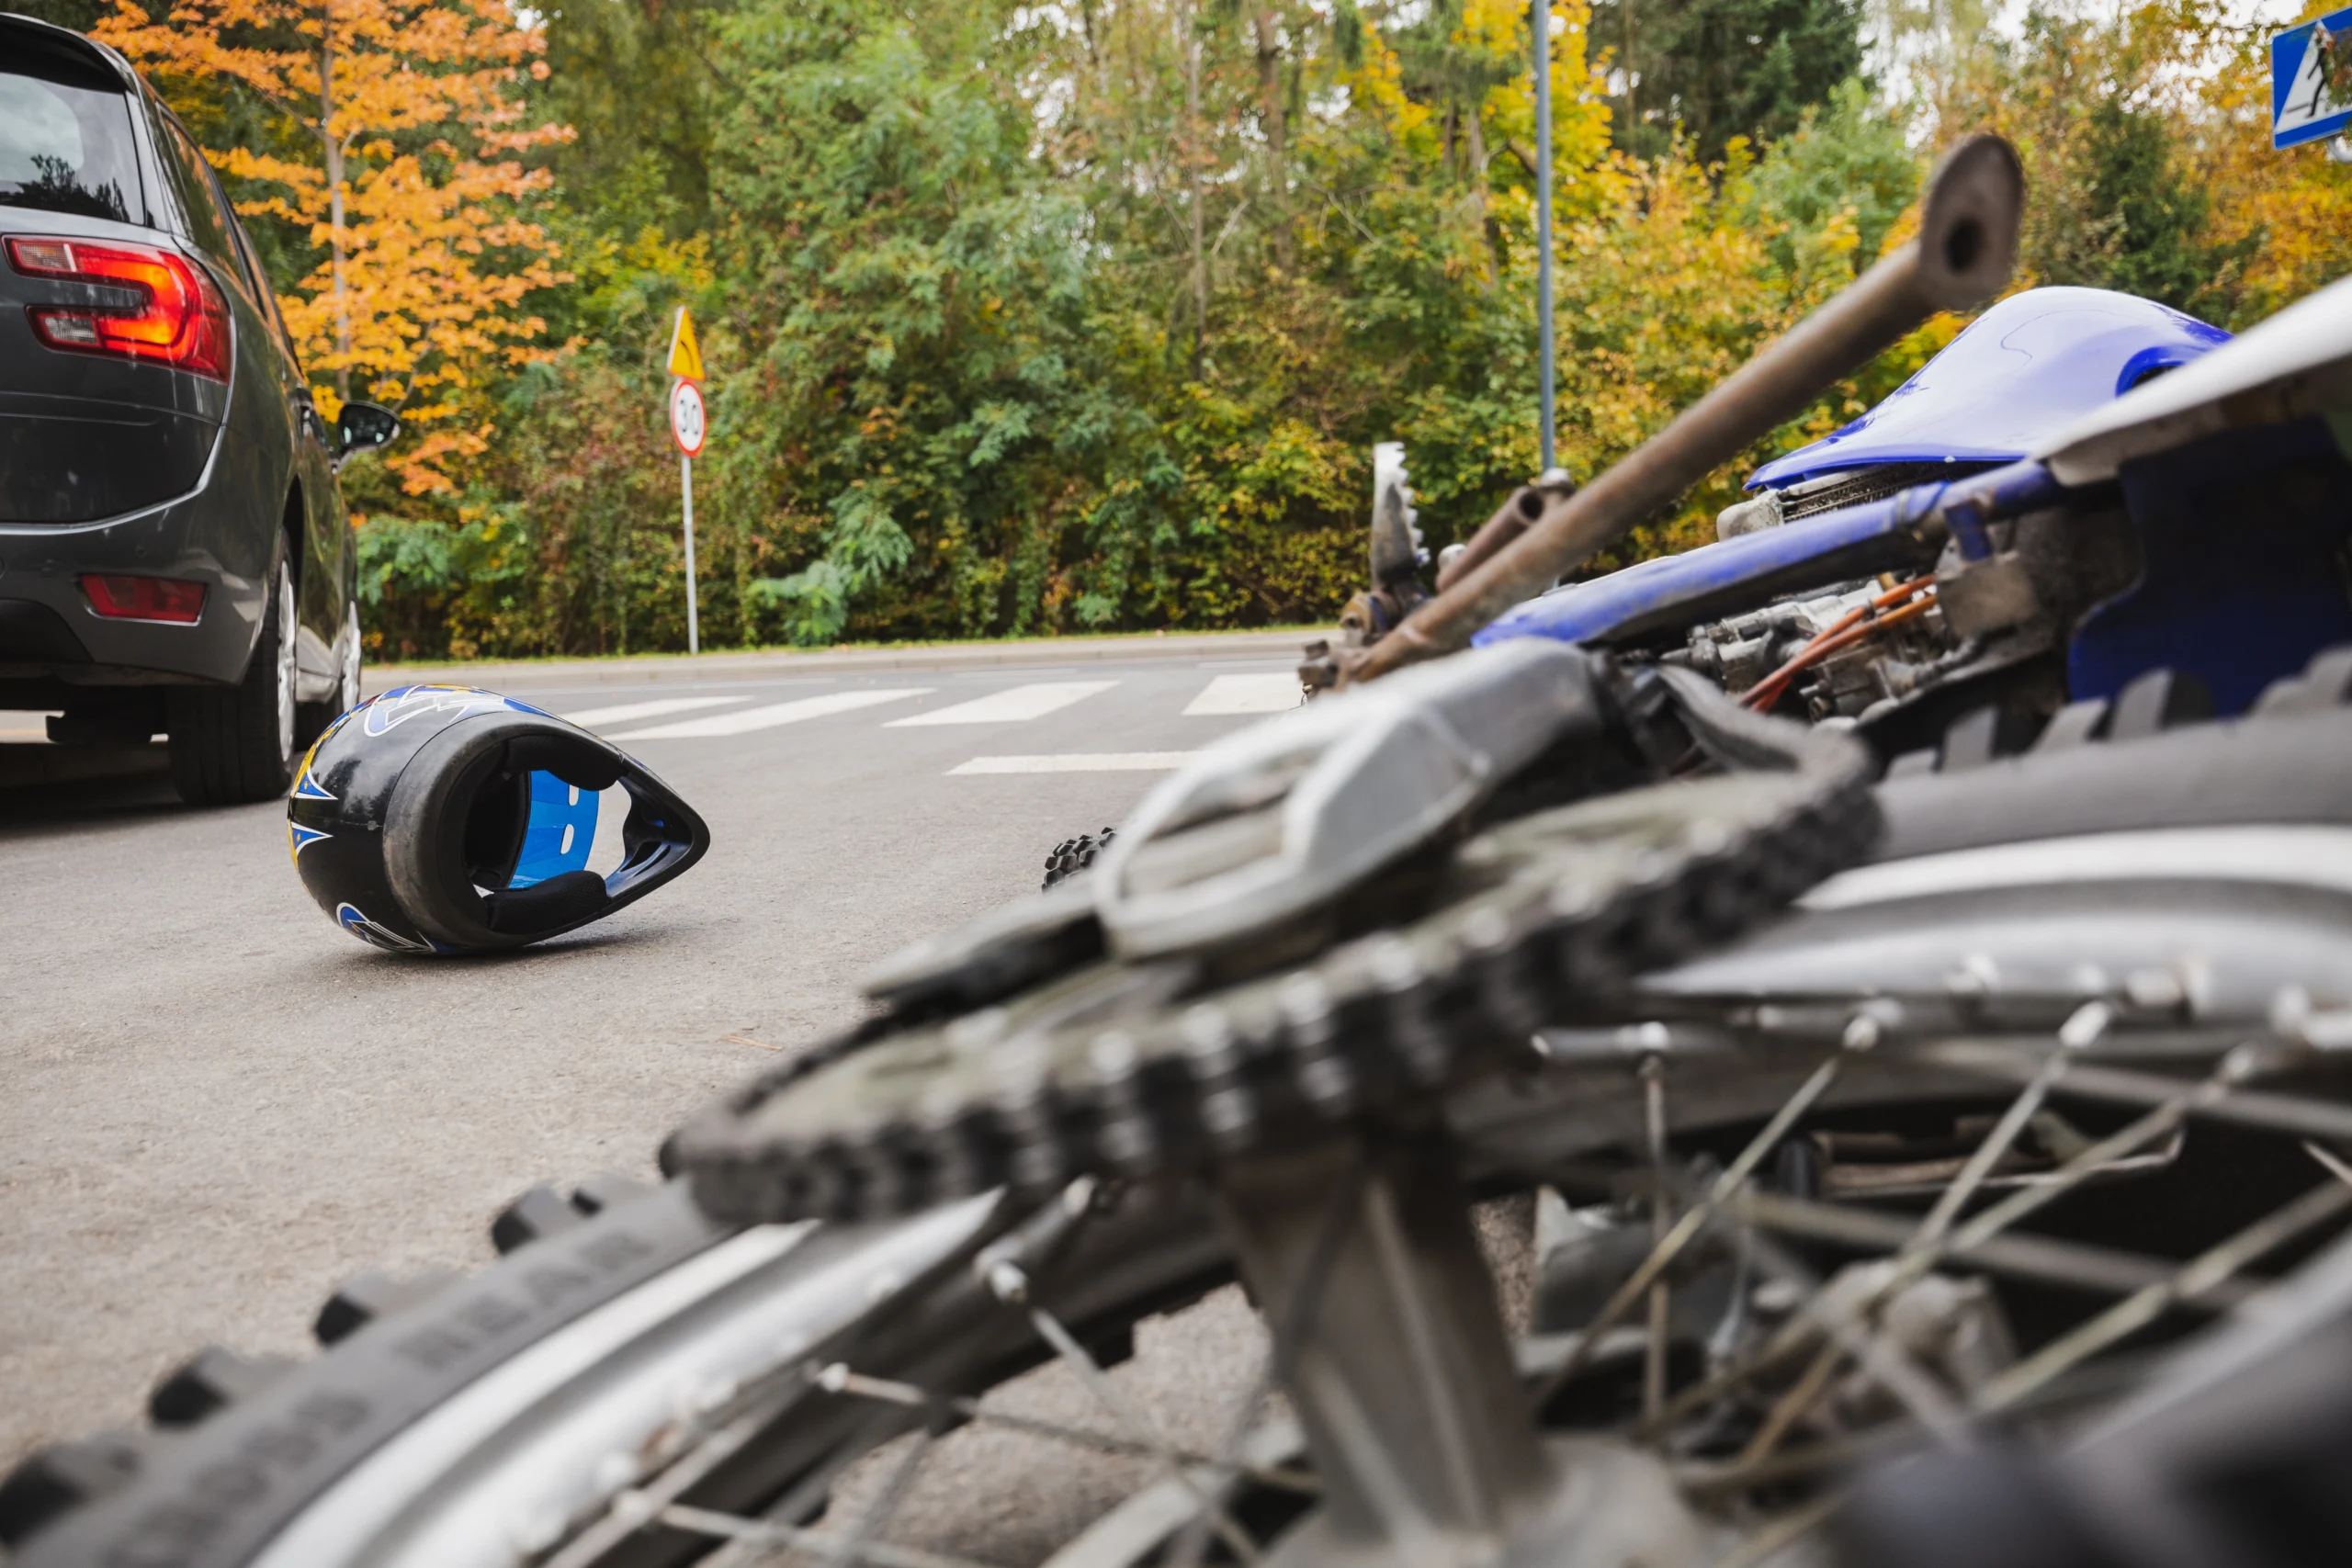 Indiana Motorcycle Insurance Requirements by Law